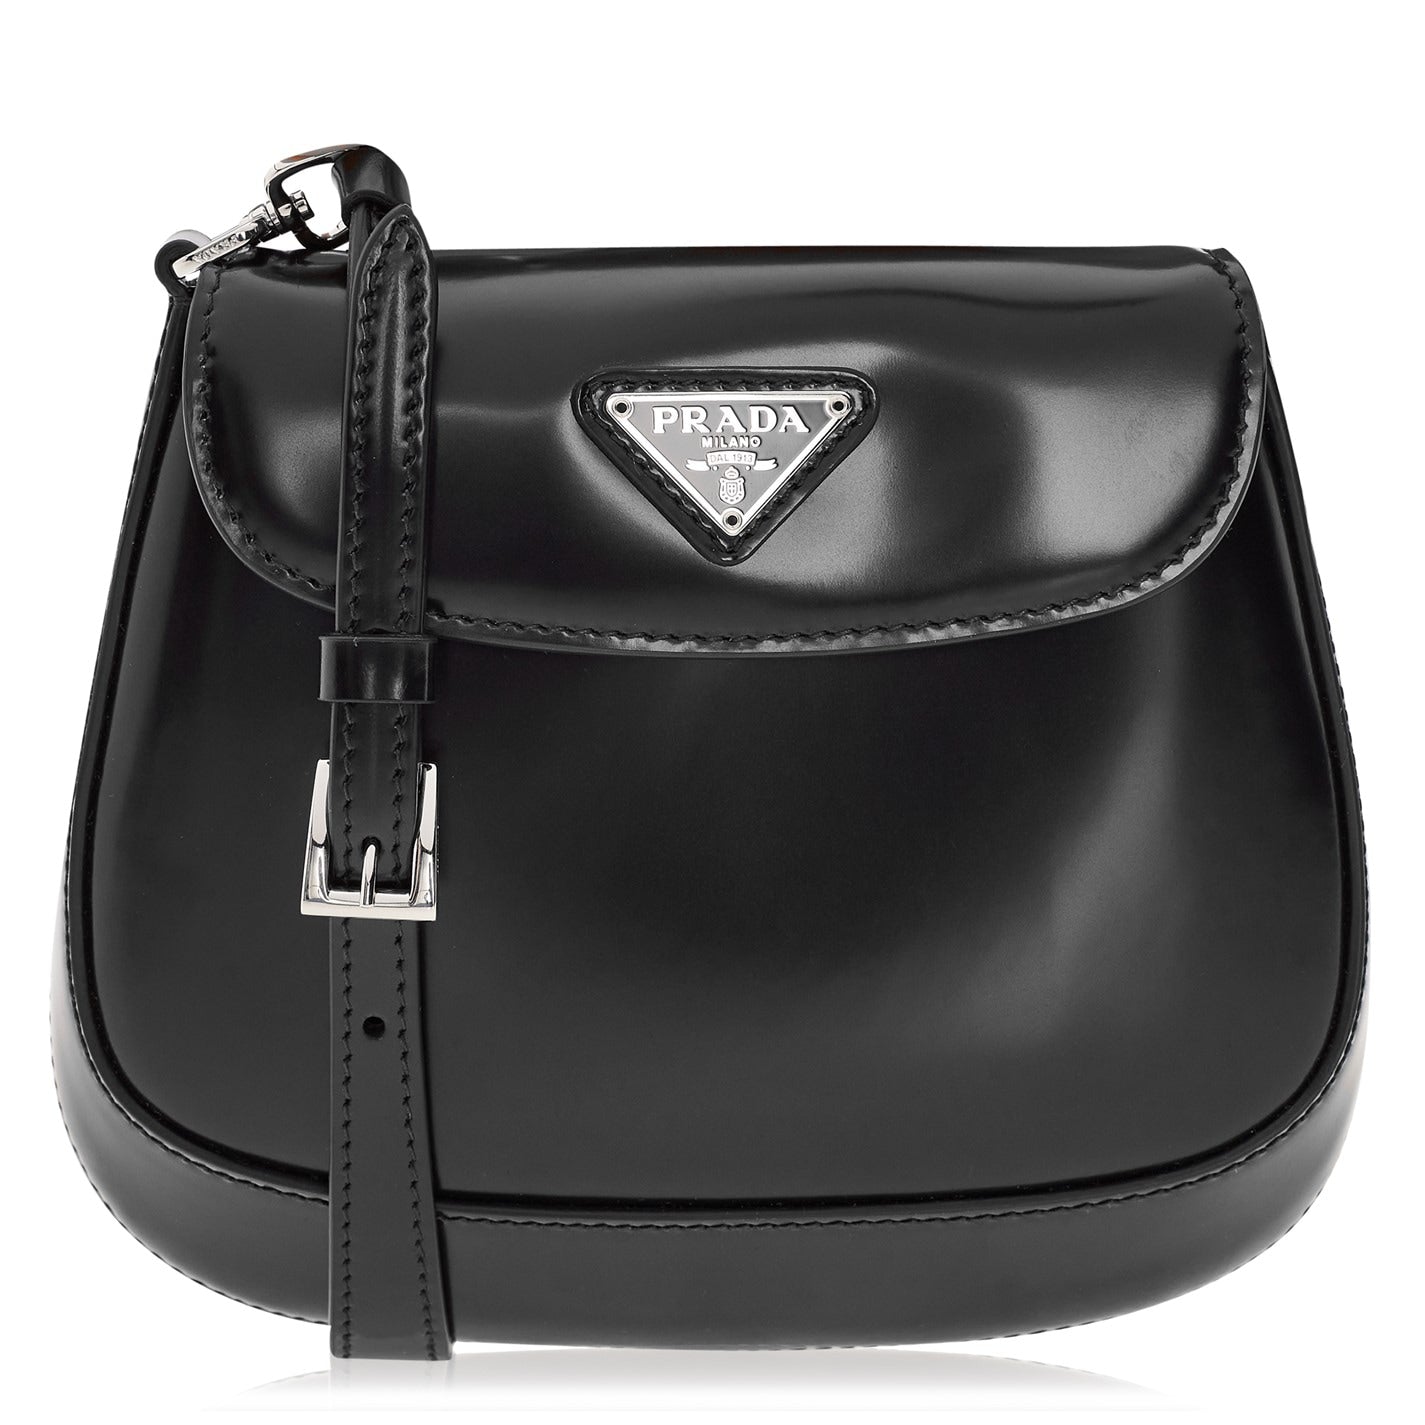 Cleo Bags for Women